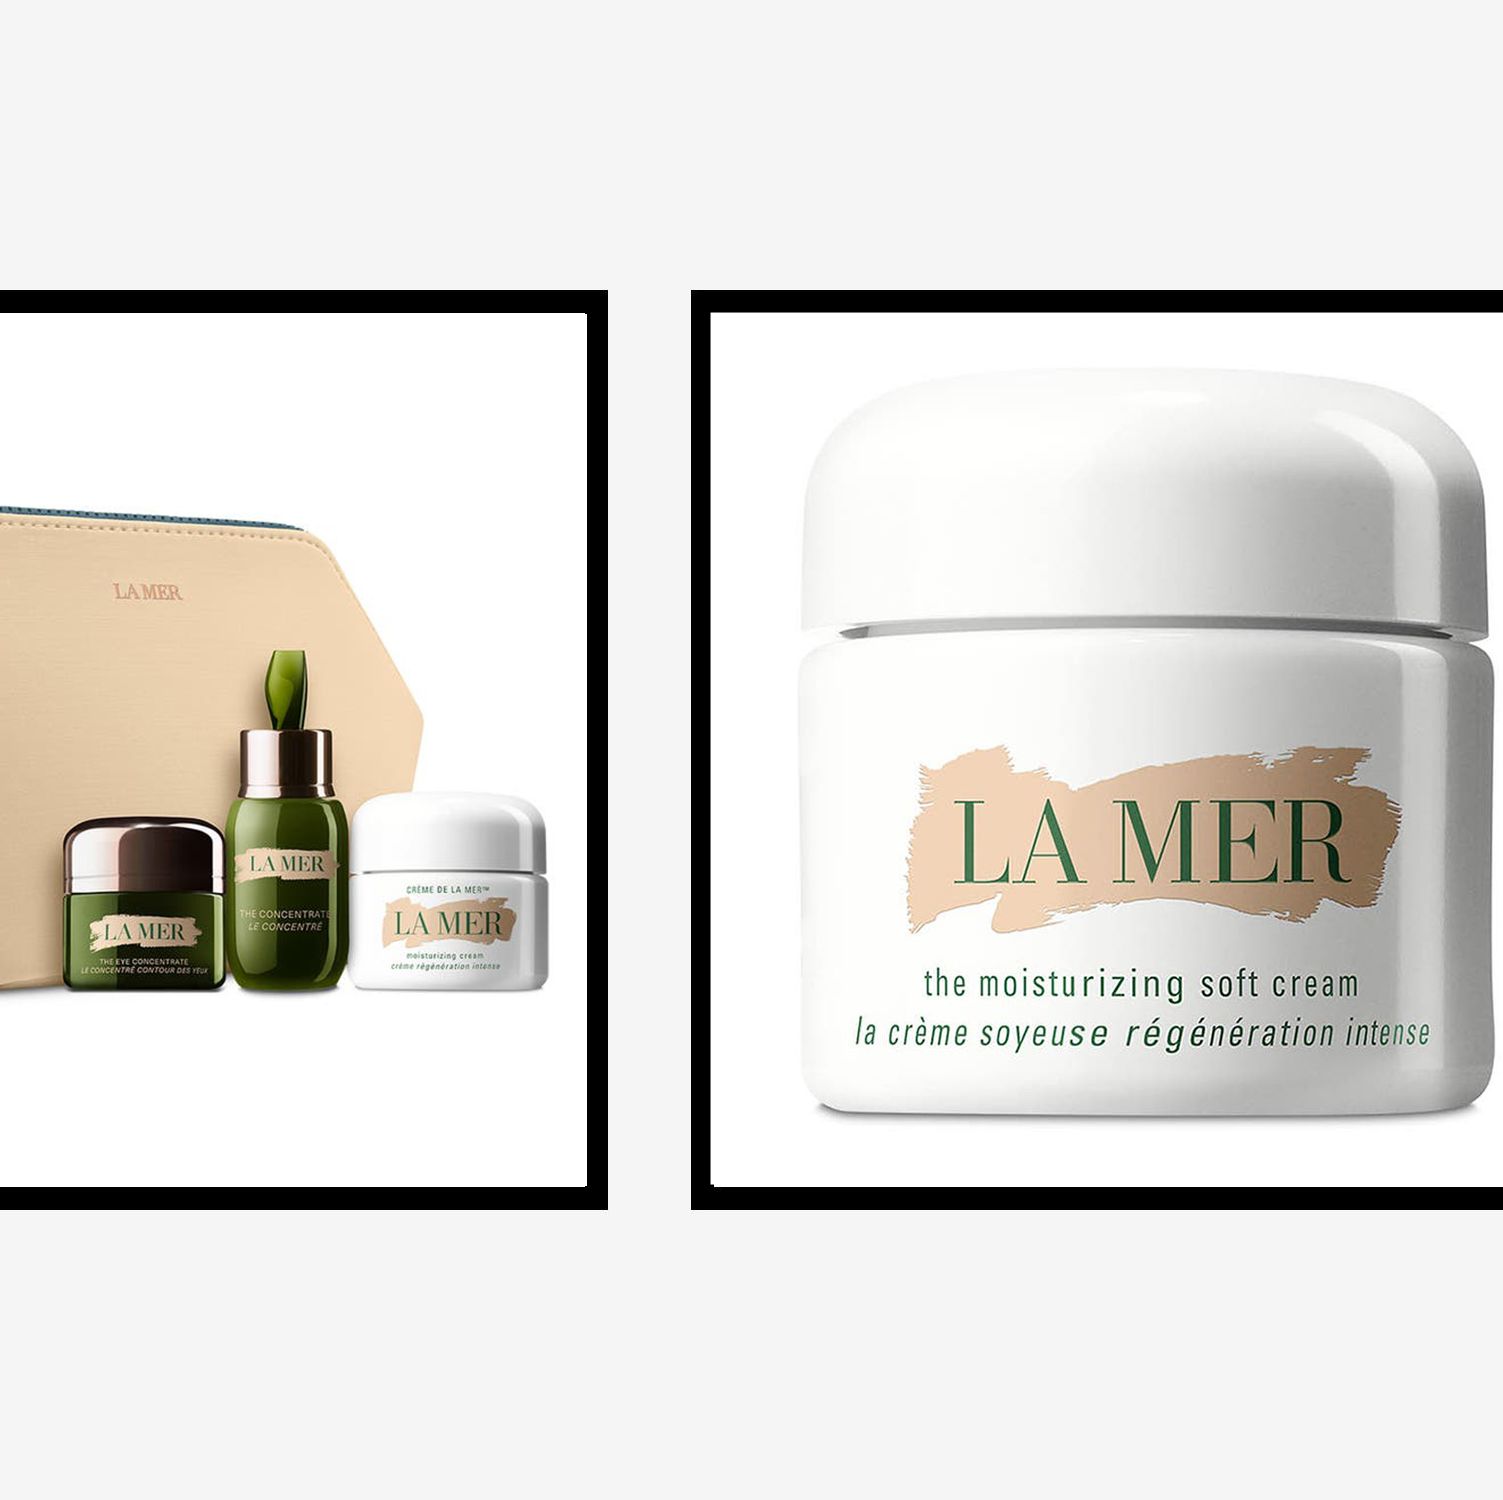 Now's the Best Time to Snag a Discounted Jar of La Mer's Celeb-Loved Moisturizer